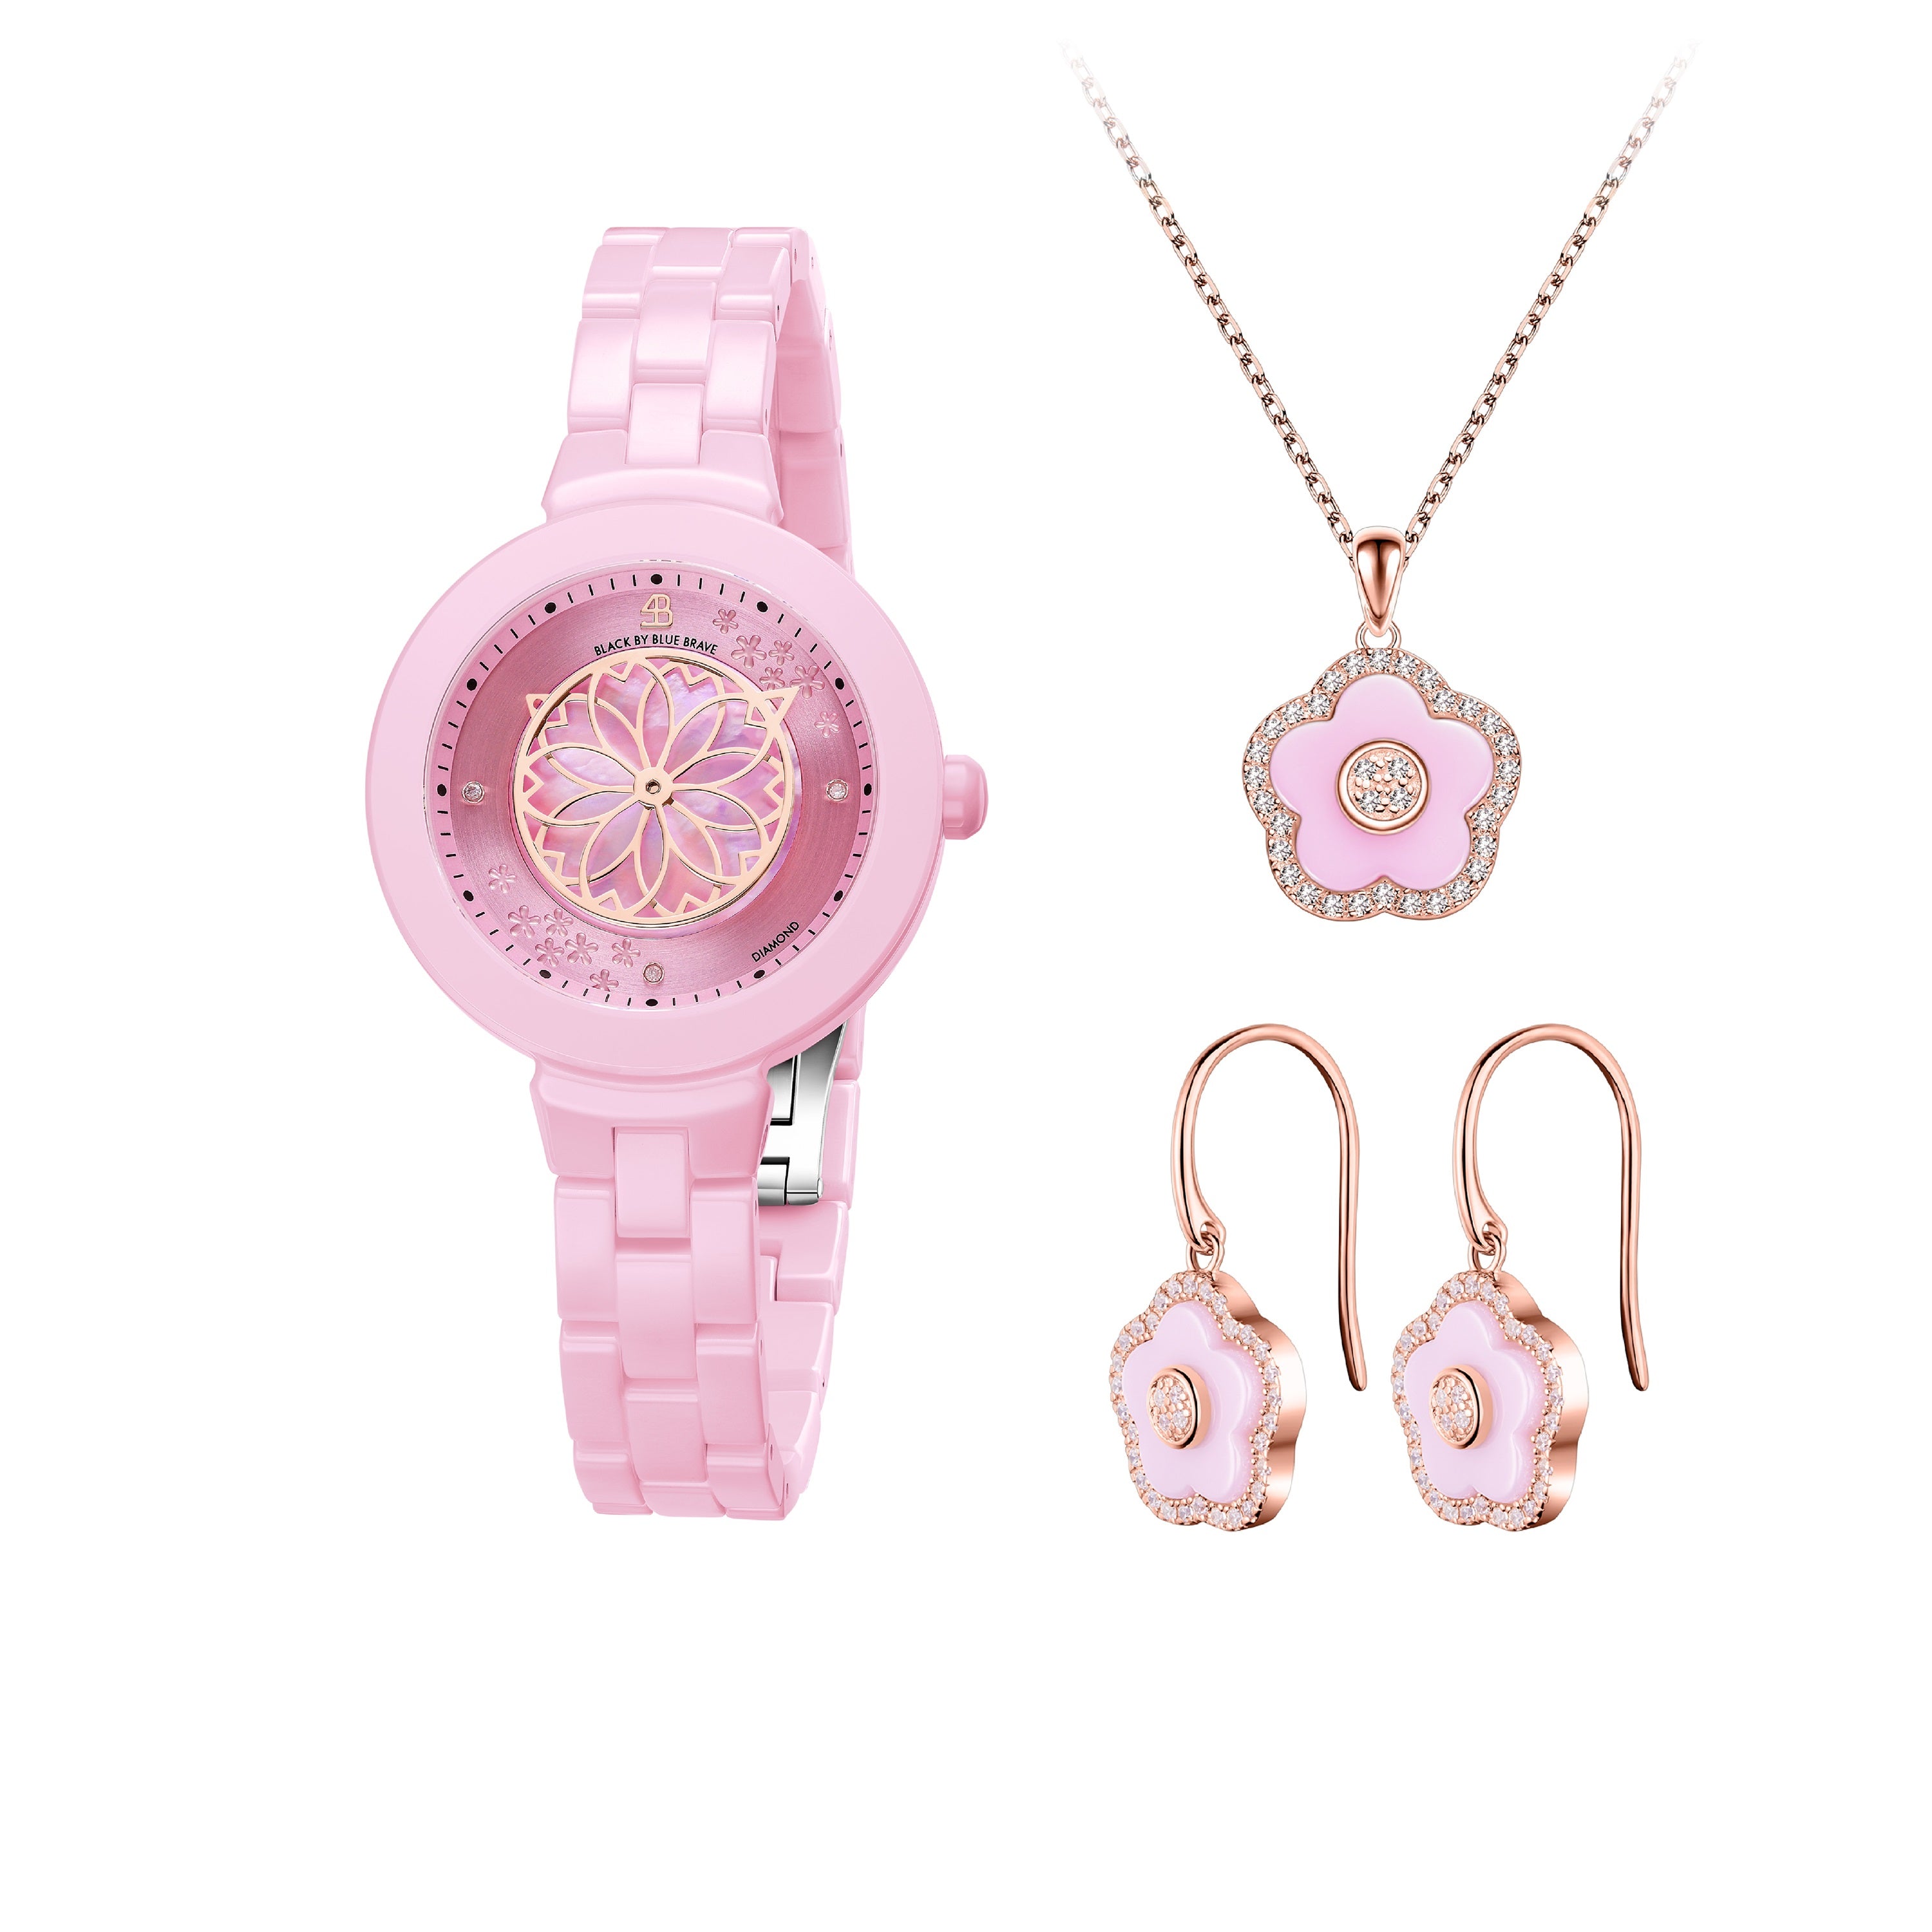 Pink Diamond Cherry Blossom Ceramic Watch With Flower Ceramic Jewelleries（Earrings & Necklace）